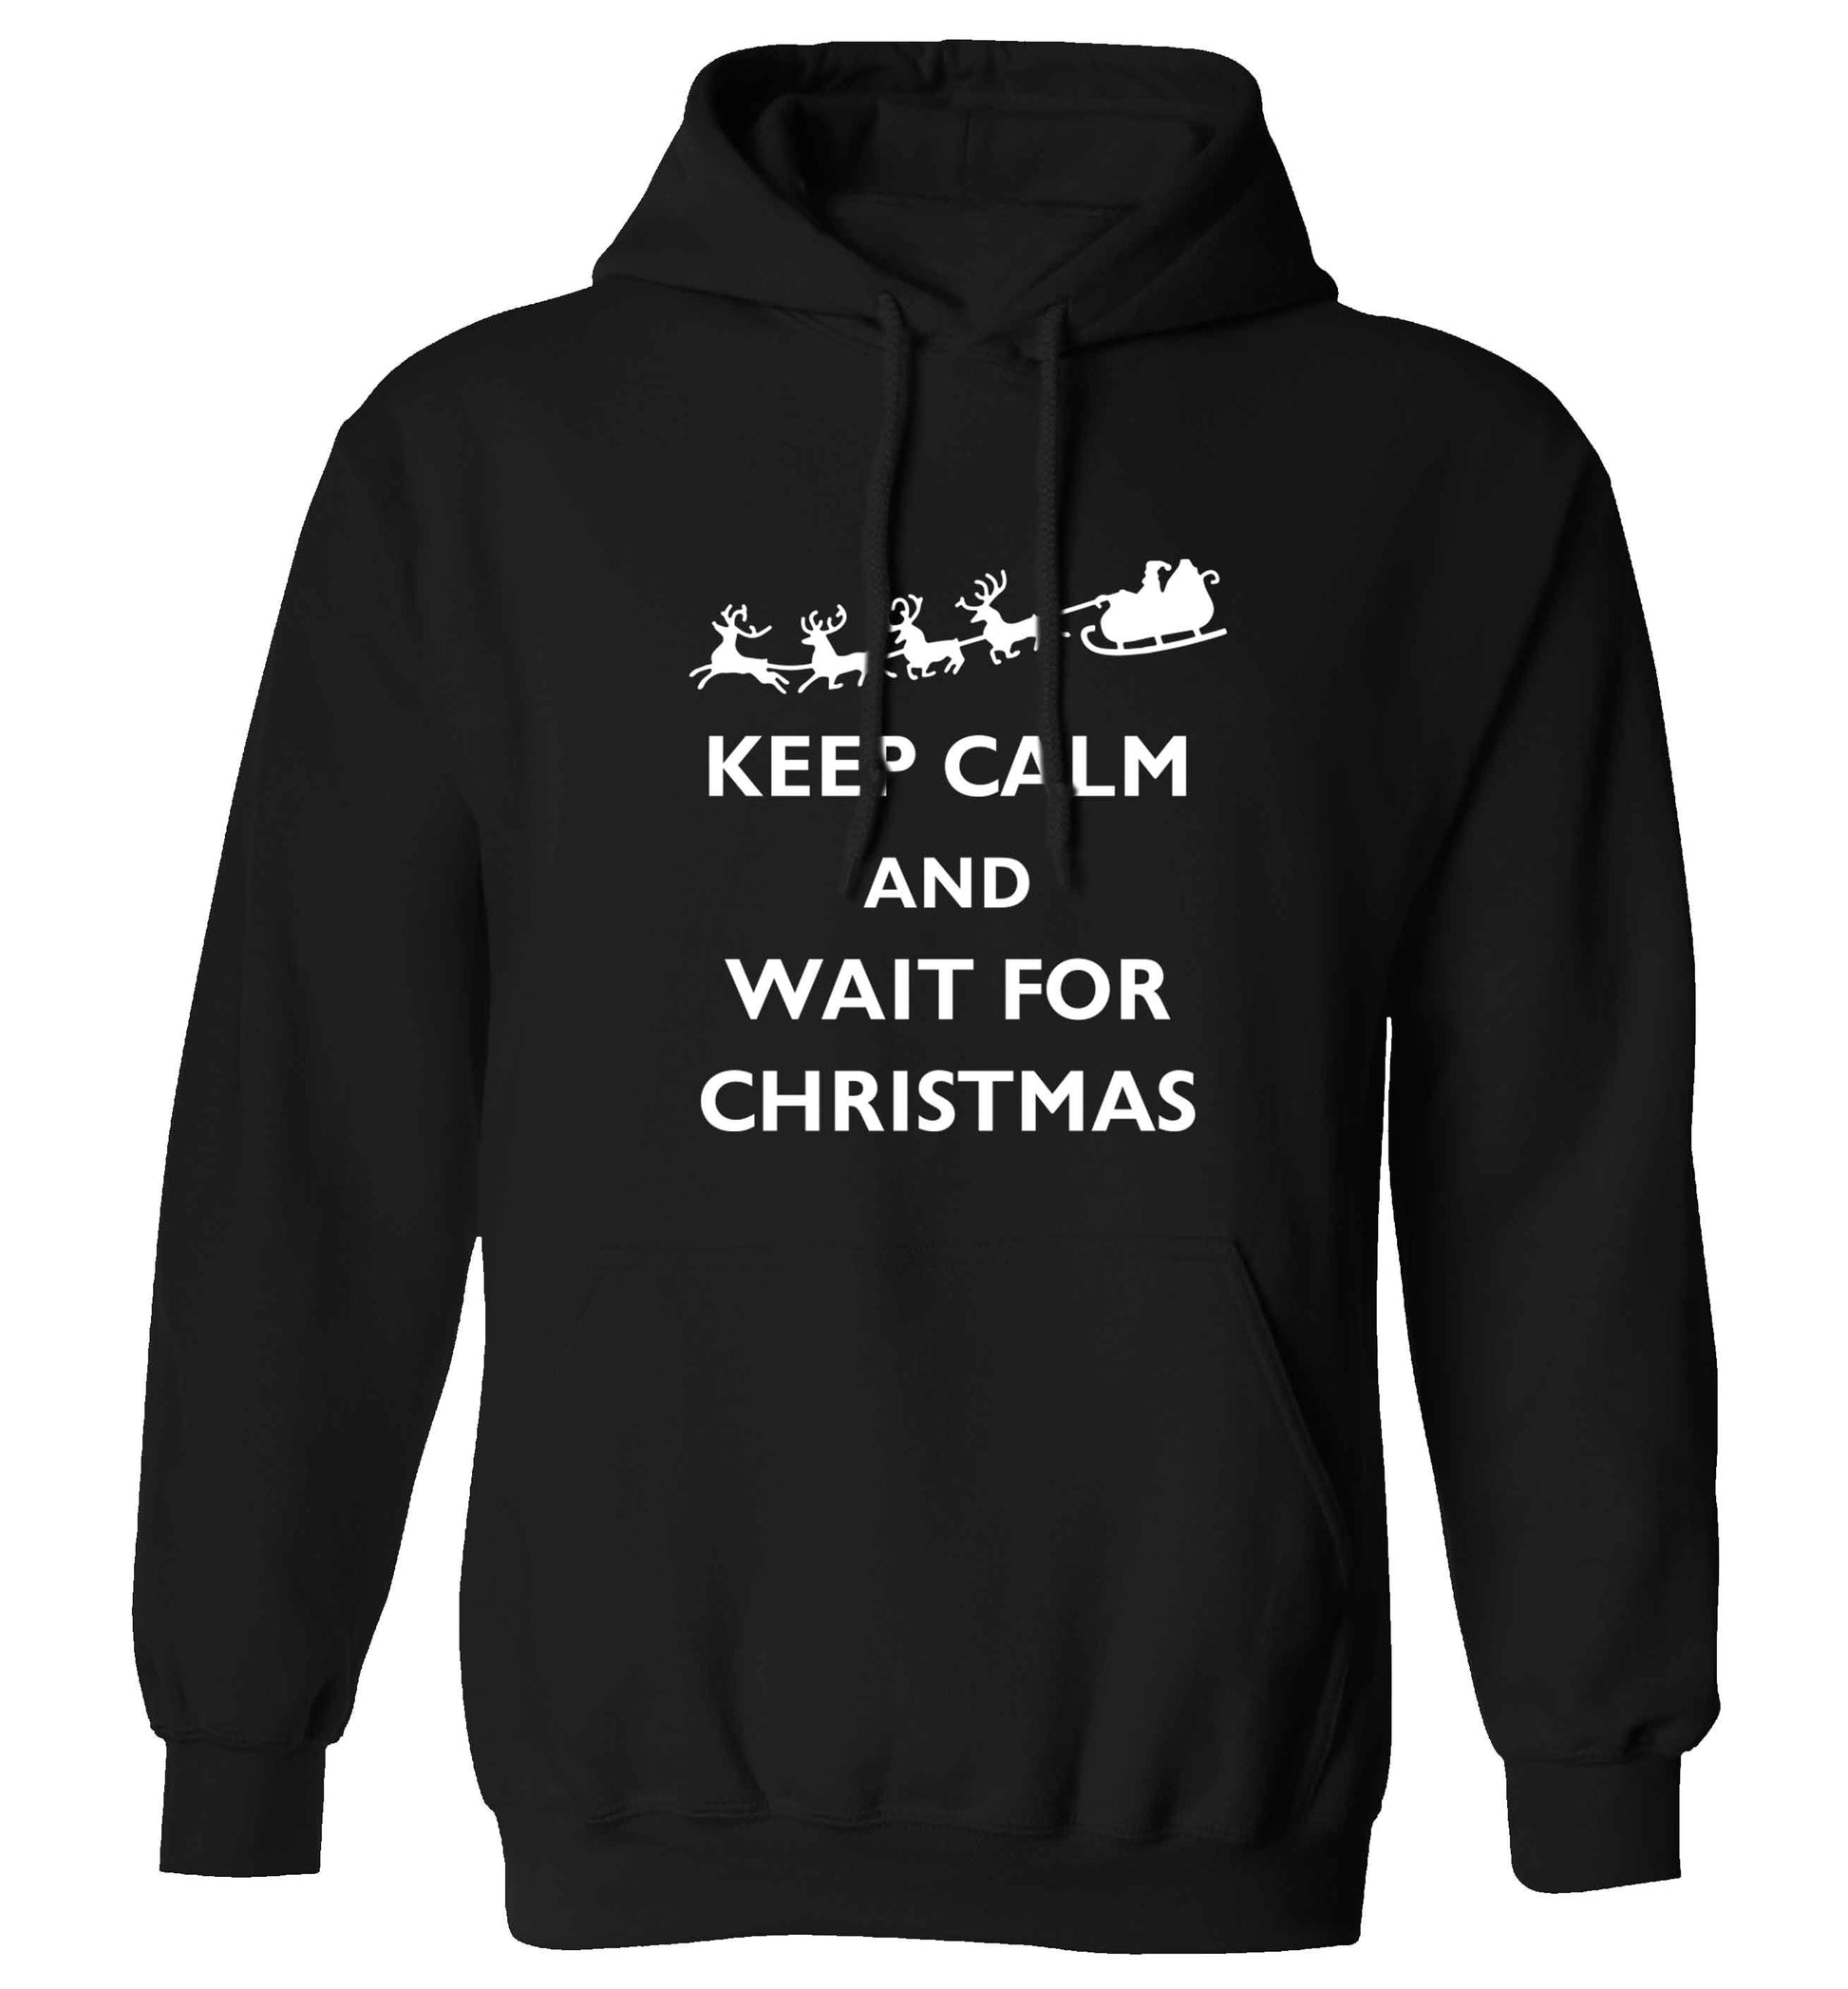 Keep calm and wait for Christmas adults unisex black hoodie 2XL